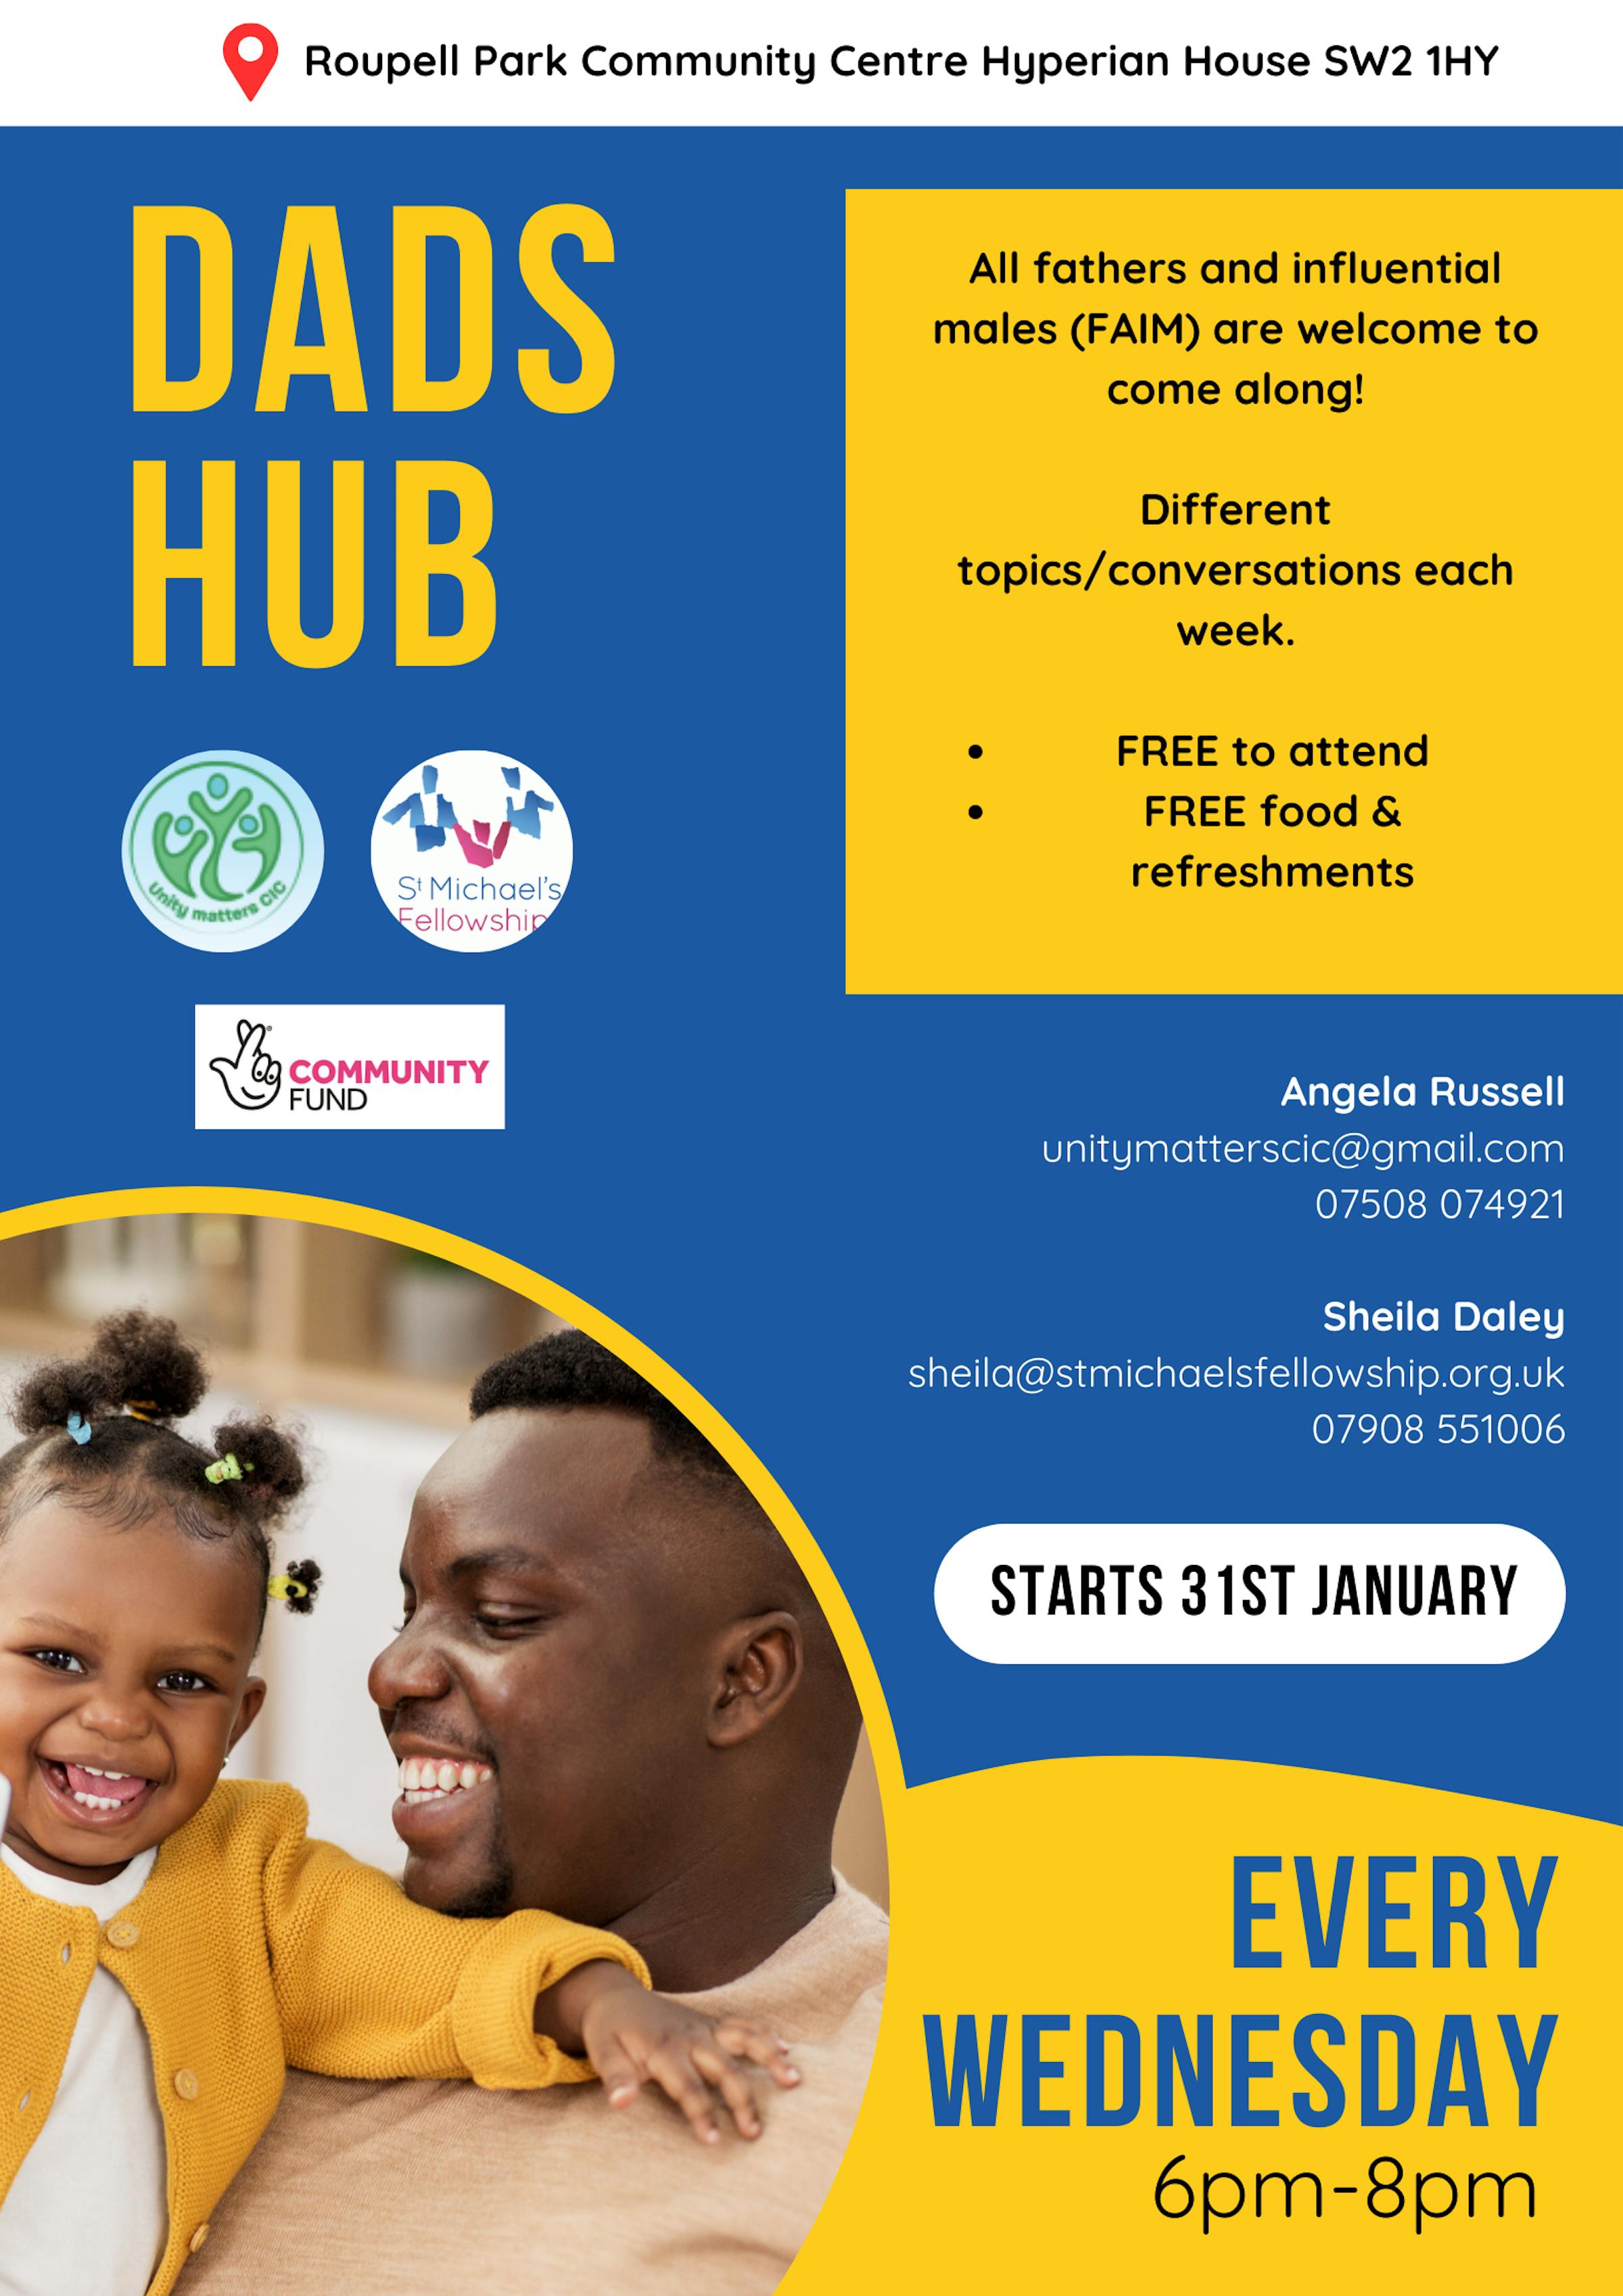 New Dads Hub now open!